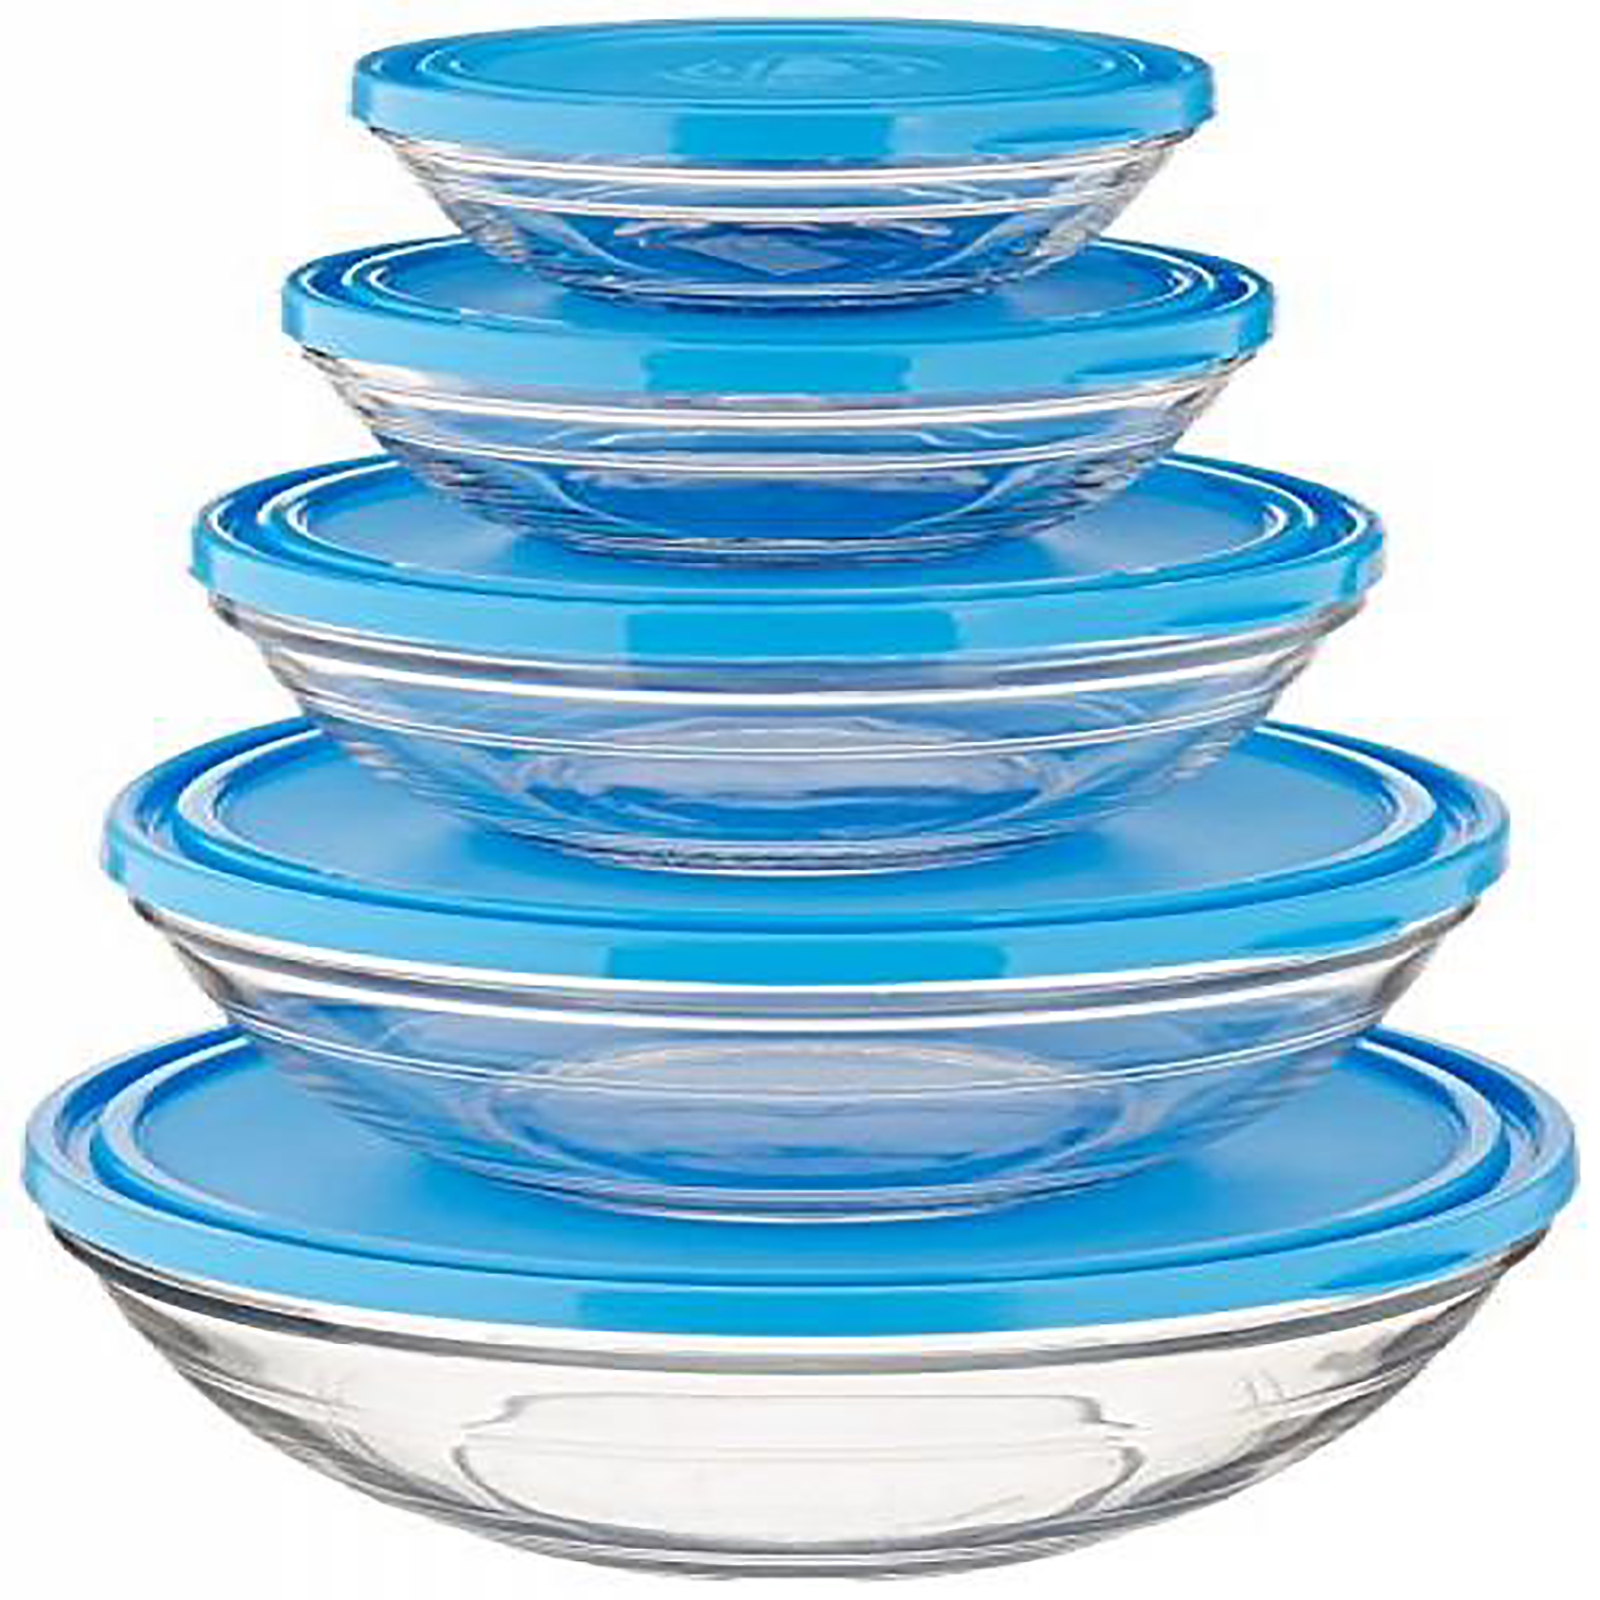 Duralex 5pc. Stackable Glass Bowls with Lids - Sears Marketplace